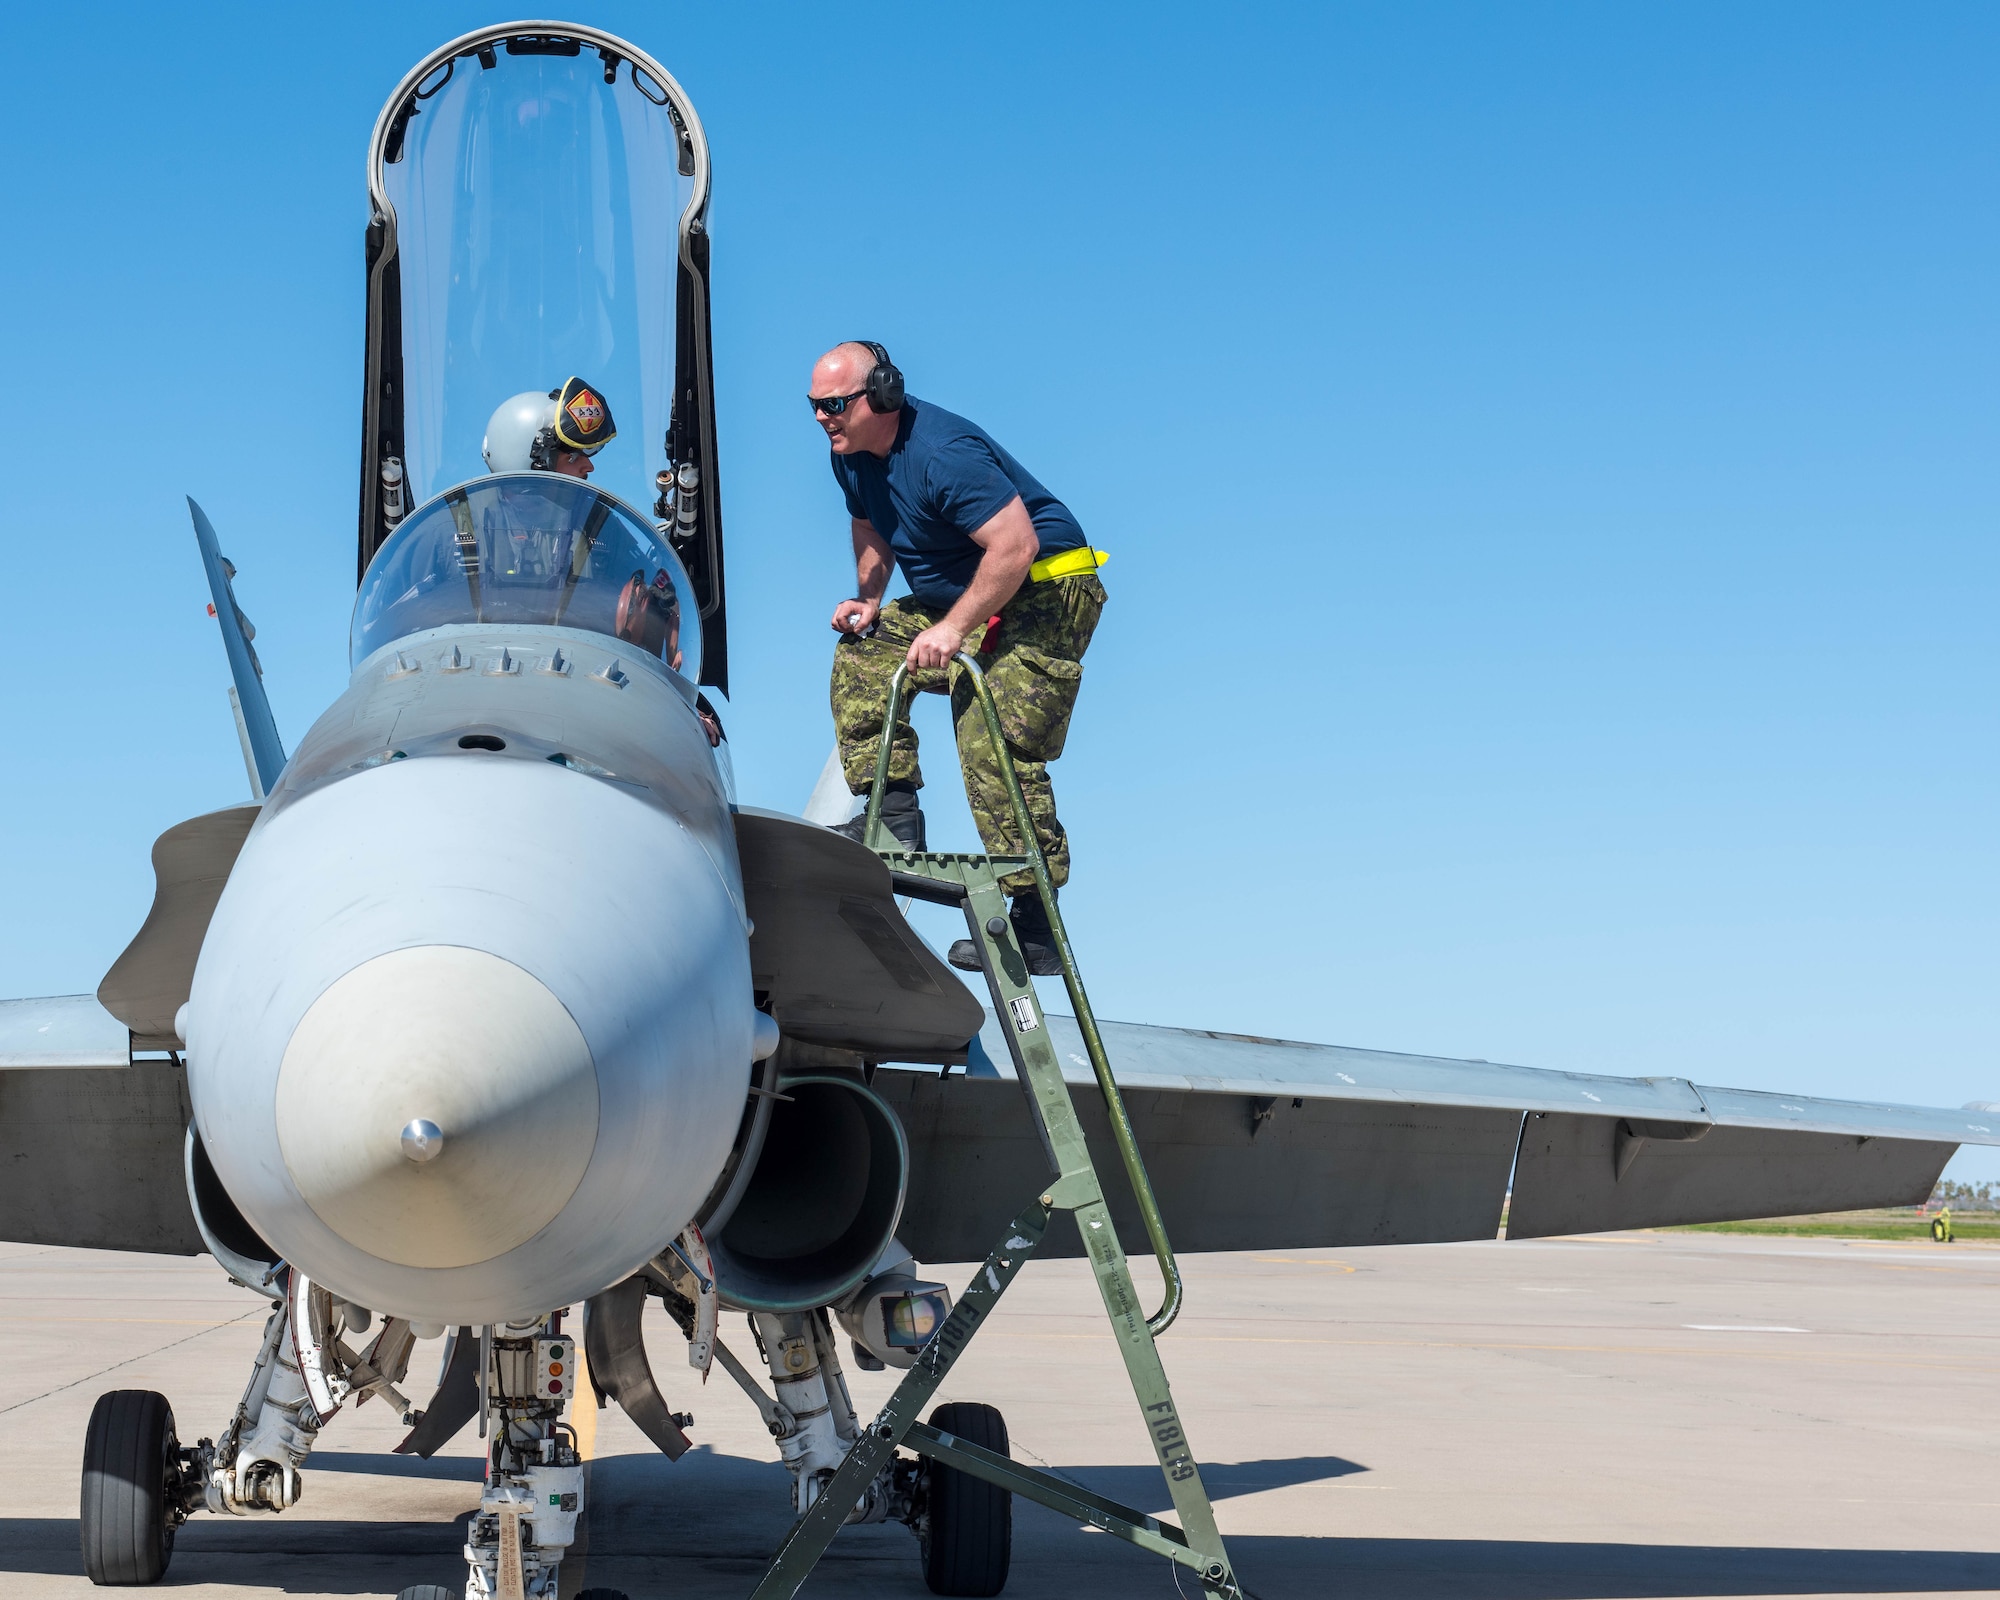 A Royal Canadian air force CF-18 Hornet pilot and crew chief, assigned to the 433rd Tactical Fighter Squadron in Canadian Forces Base Bagotville, Quebec, Canada, prepare for takeoff Feb. 25, 2020, at Luke Air Force Base, Ariz.